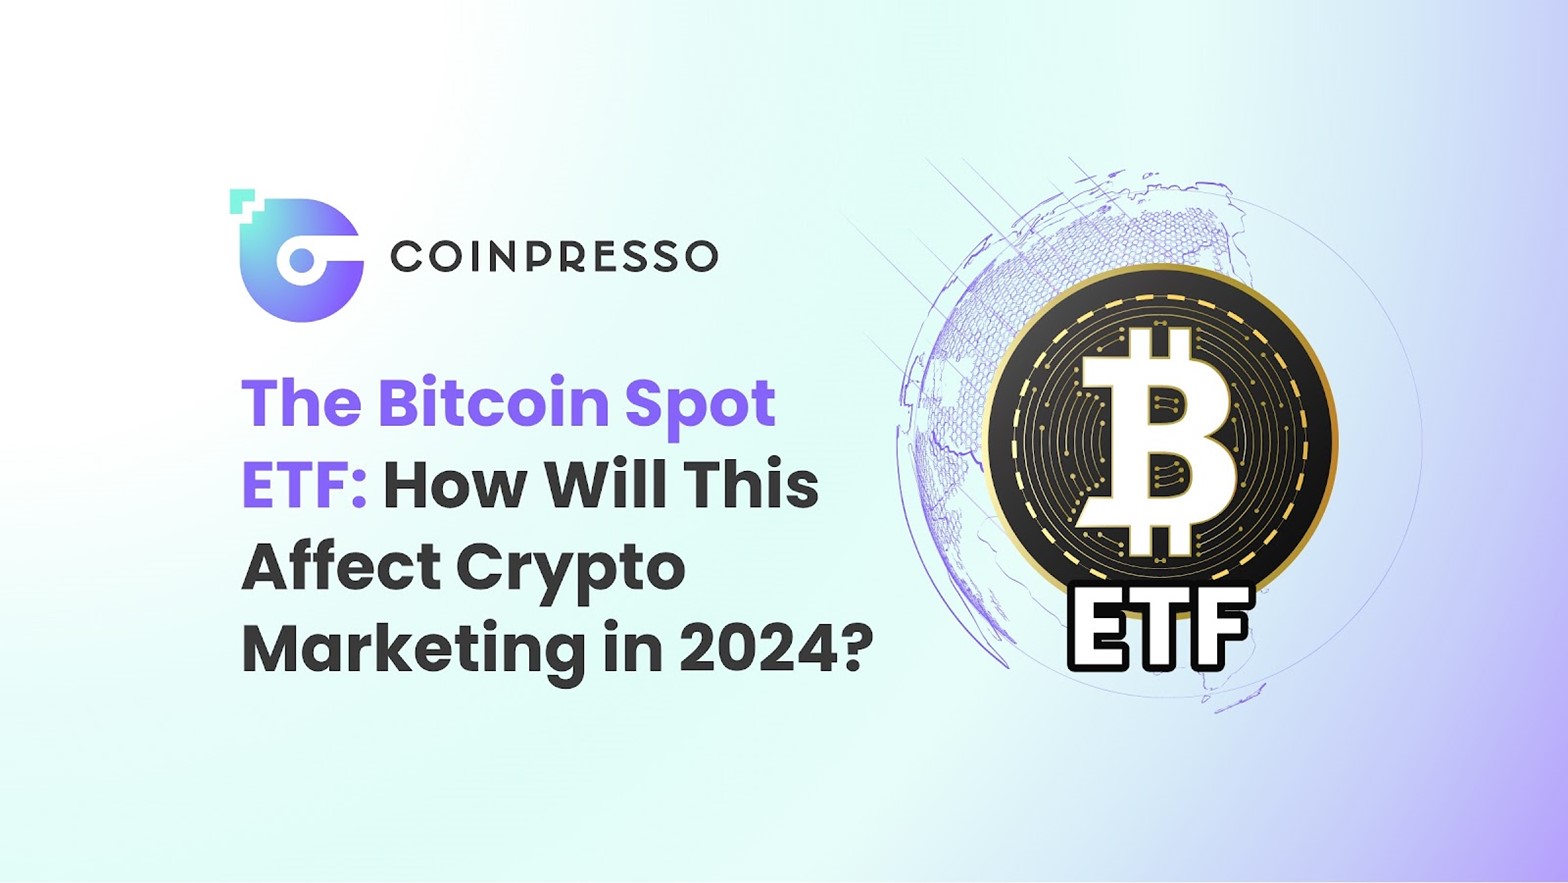 The Bitcoin Spot ETF: How Will This Affect Crypto Marketing in 2024?